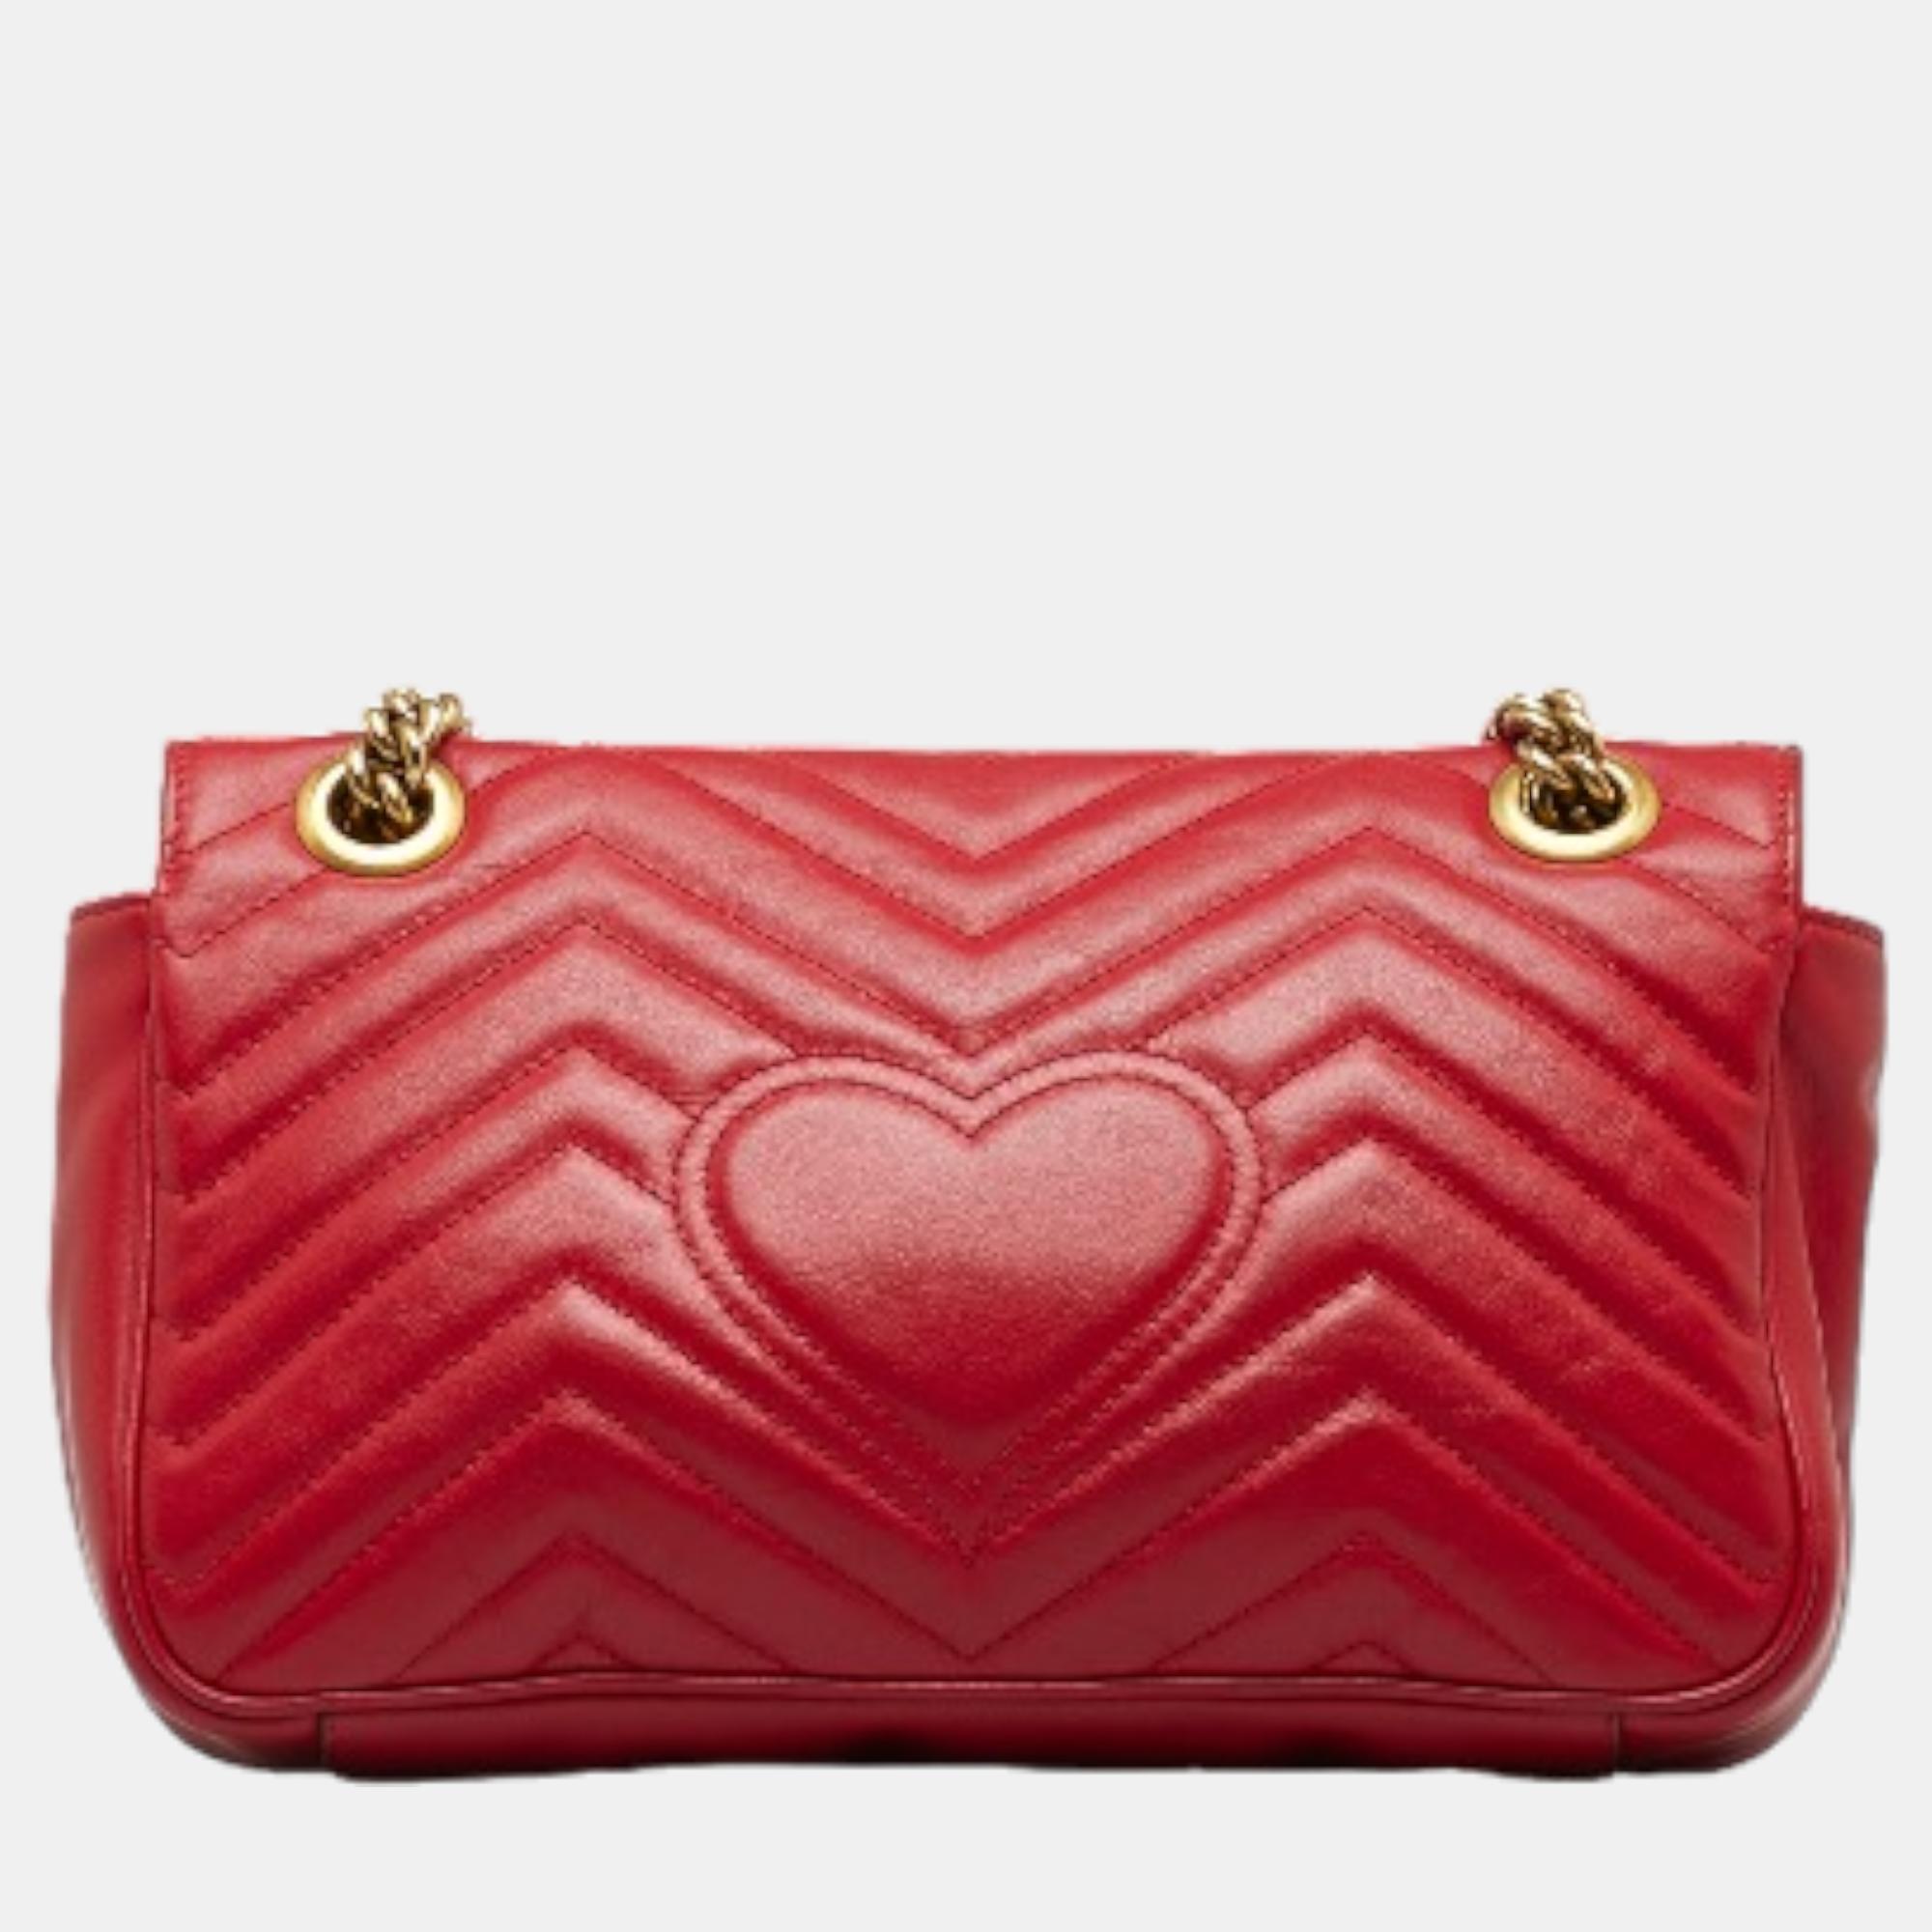 Gucci Red Leather GG Small Marmont Matelasse Shoulder Bag